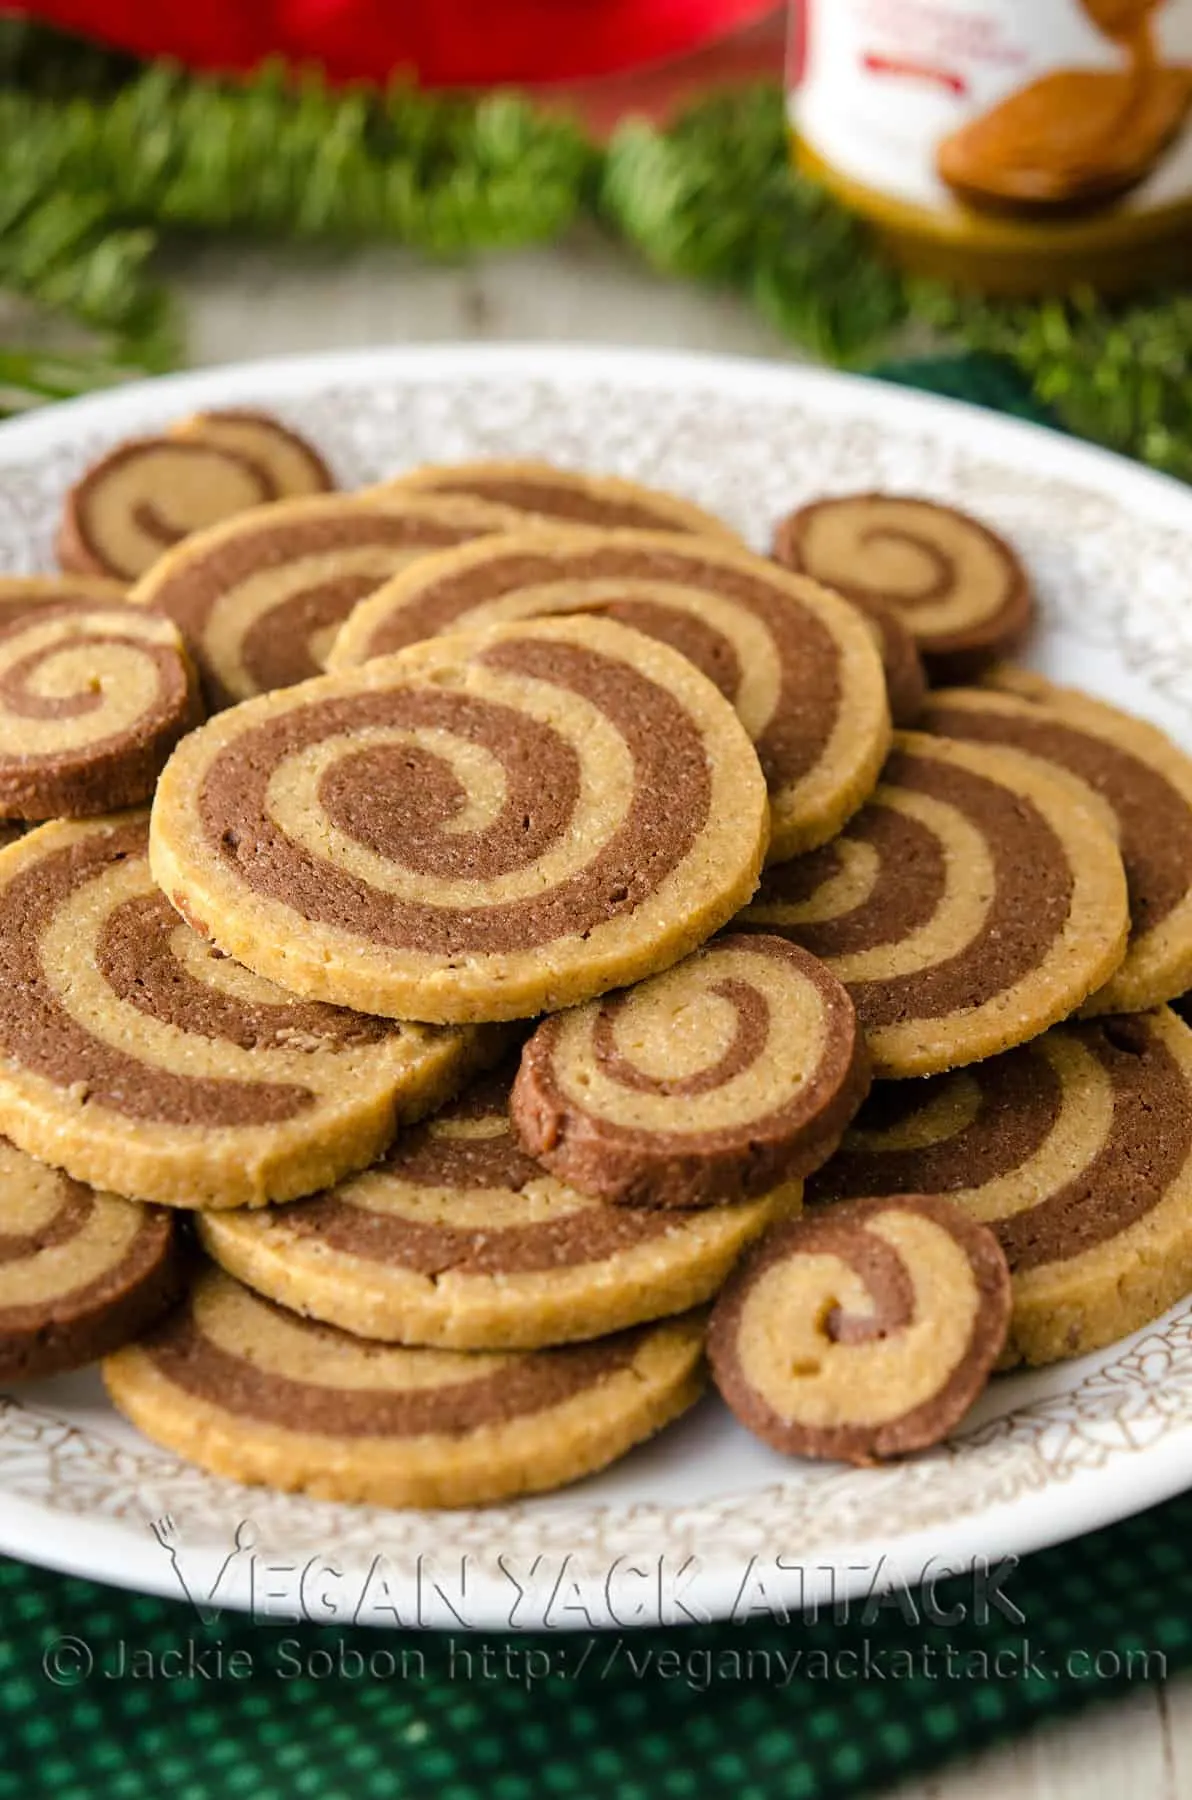 Biscoff Chocolate Pinwheel Cookies on a white plate surrounded by pine branches